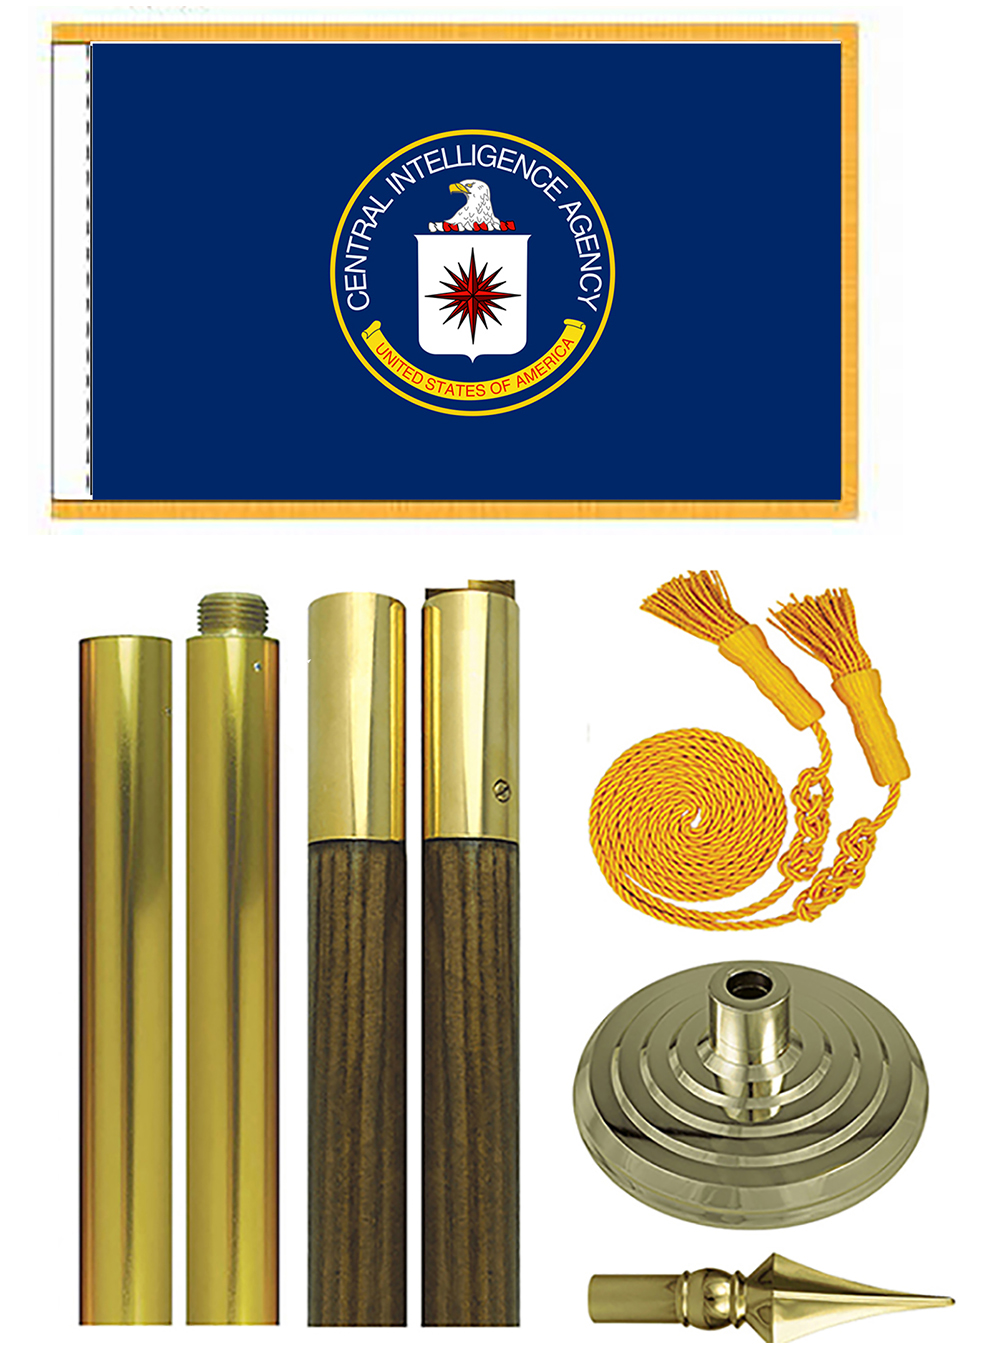 CIA Challenge Central Intelegence Agency Partnership Unity Trust National Resources Special Activities Logo 3x5 feet Flag Banner Vivid Color Double Stitched Brass Grommets